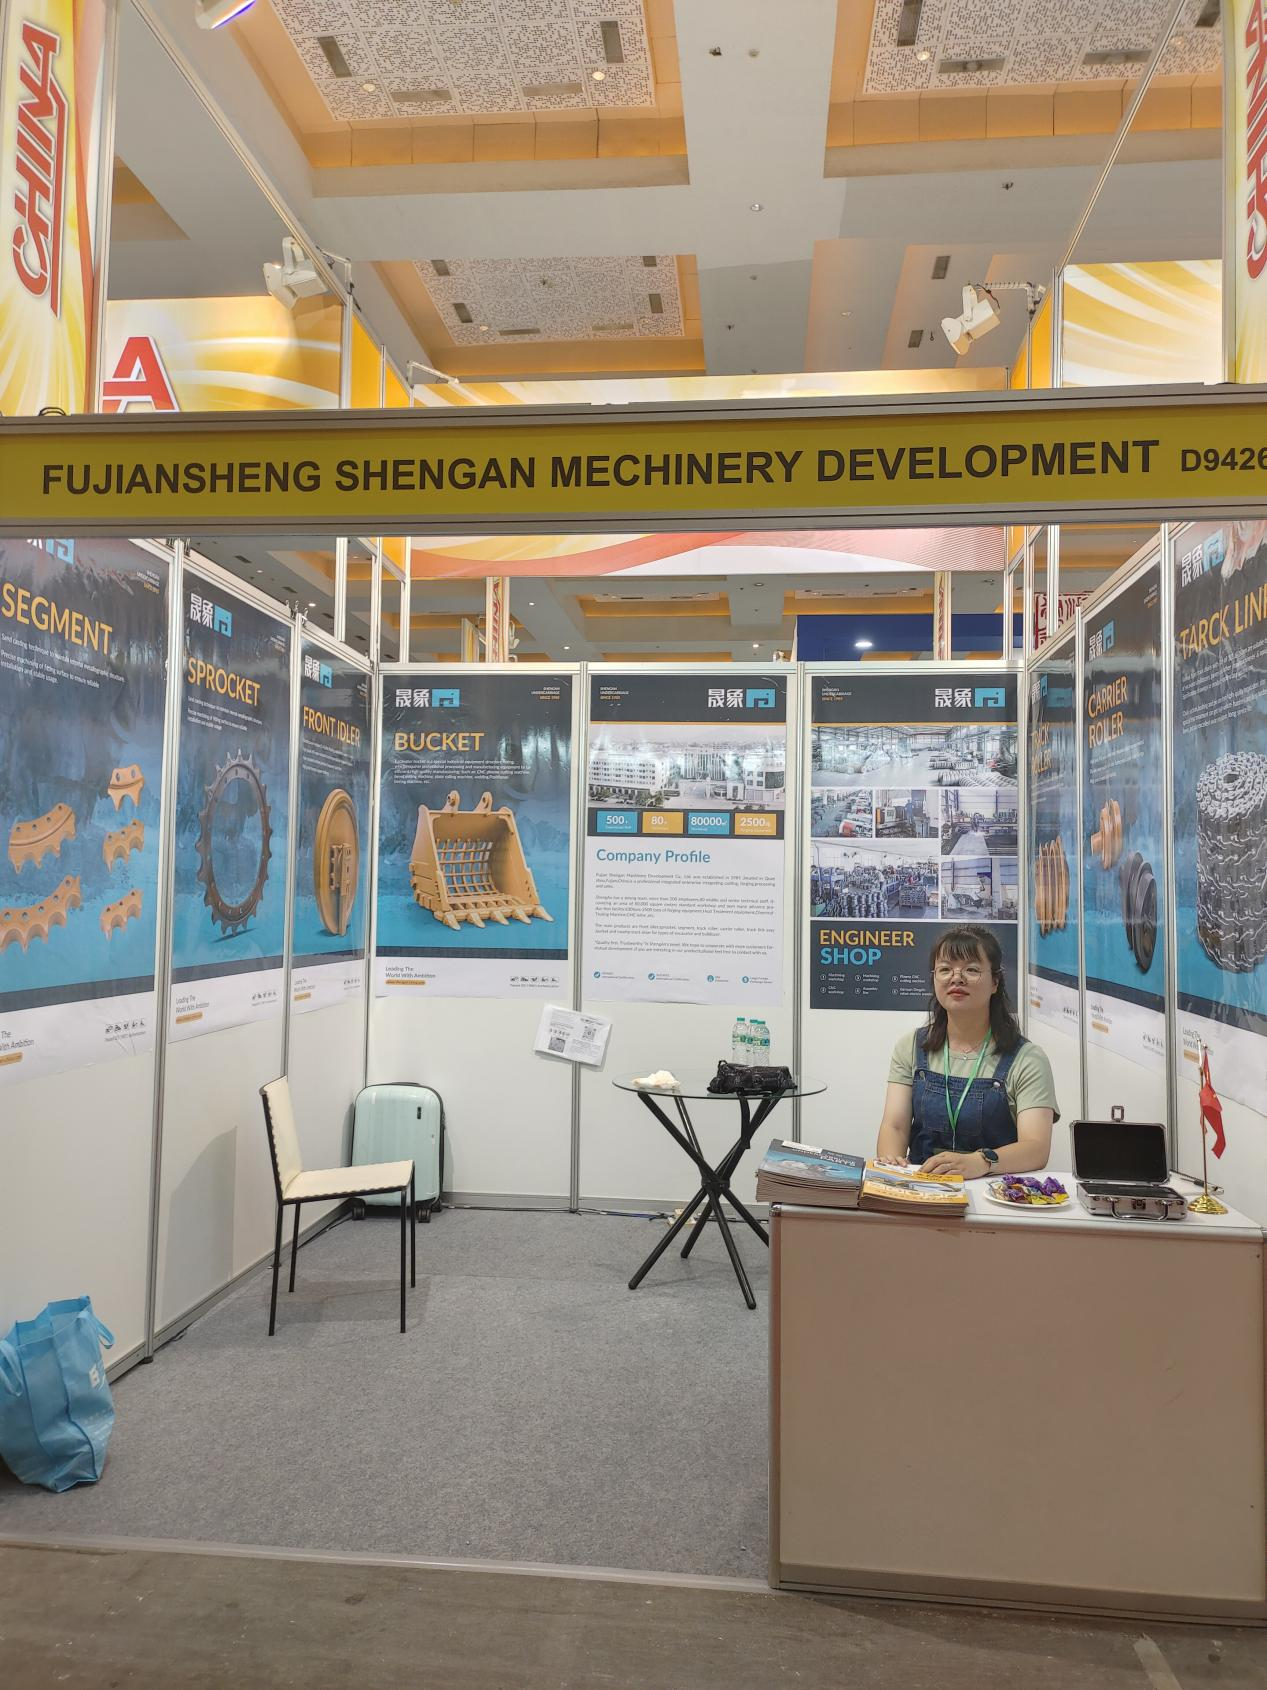 Fujian Sheng'an Machinery Development Co., Ltd. participated in the 23rd Indonesia Construction Machinery Exhibition